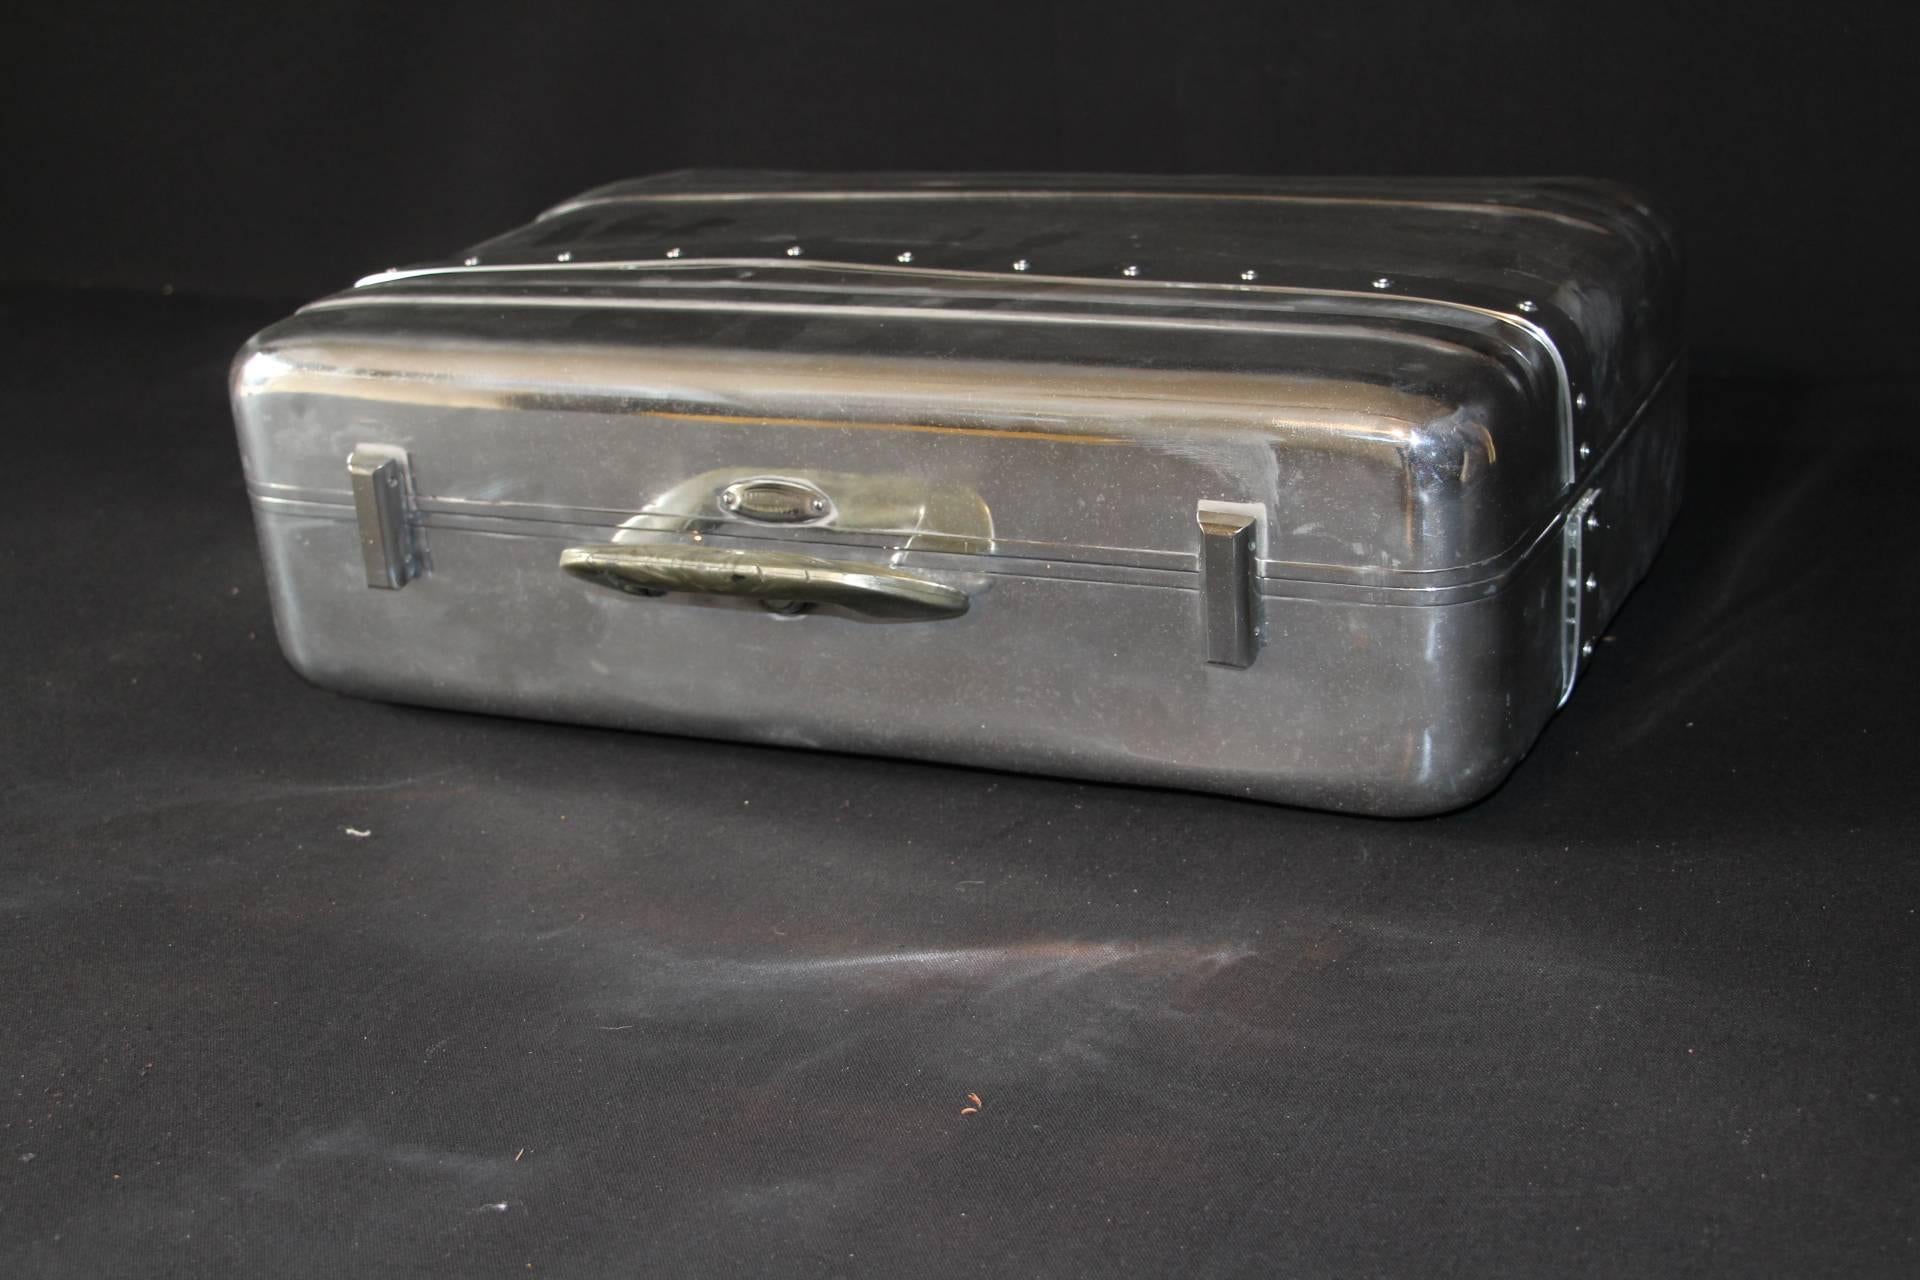 fear and loathing briefcase for sale